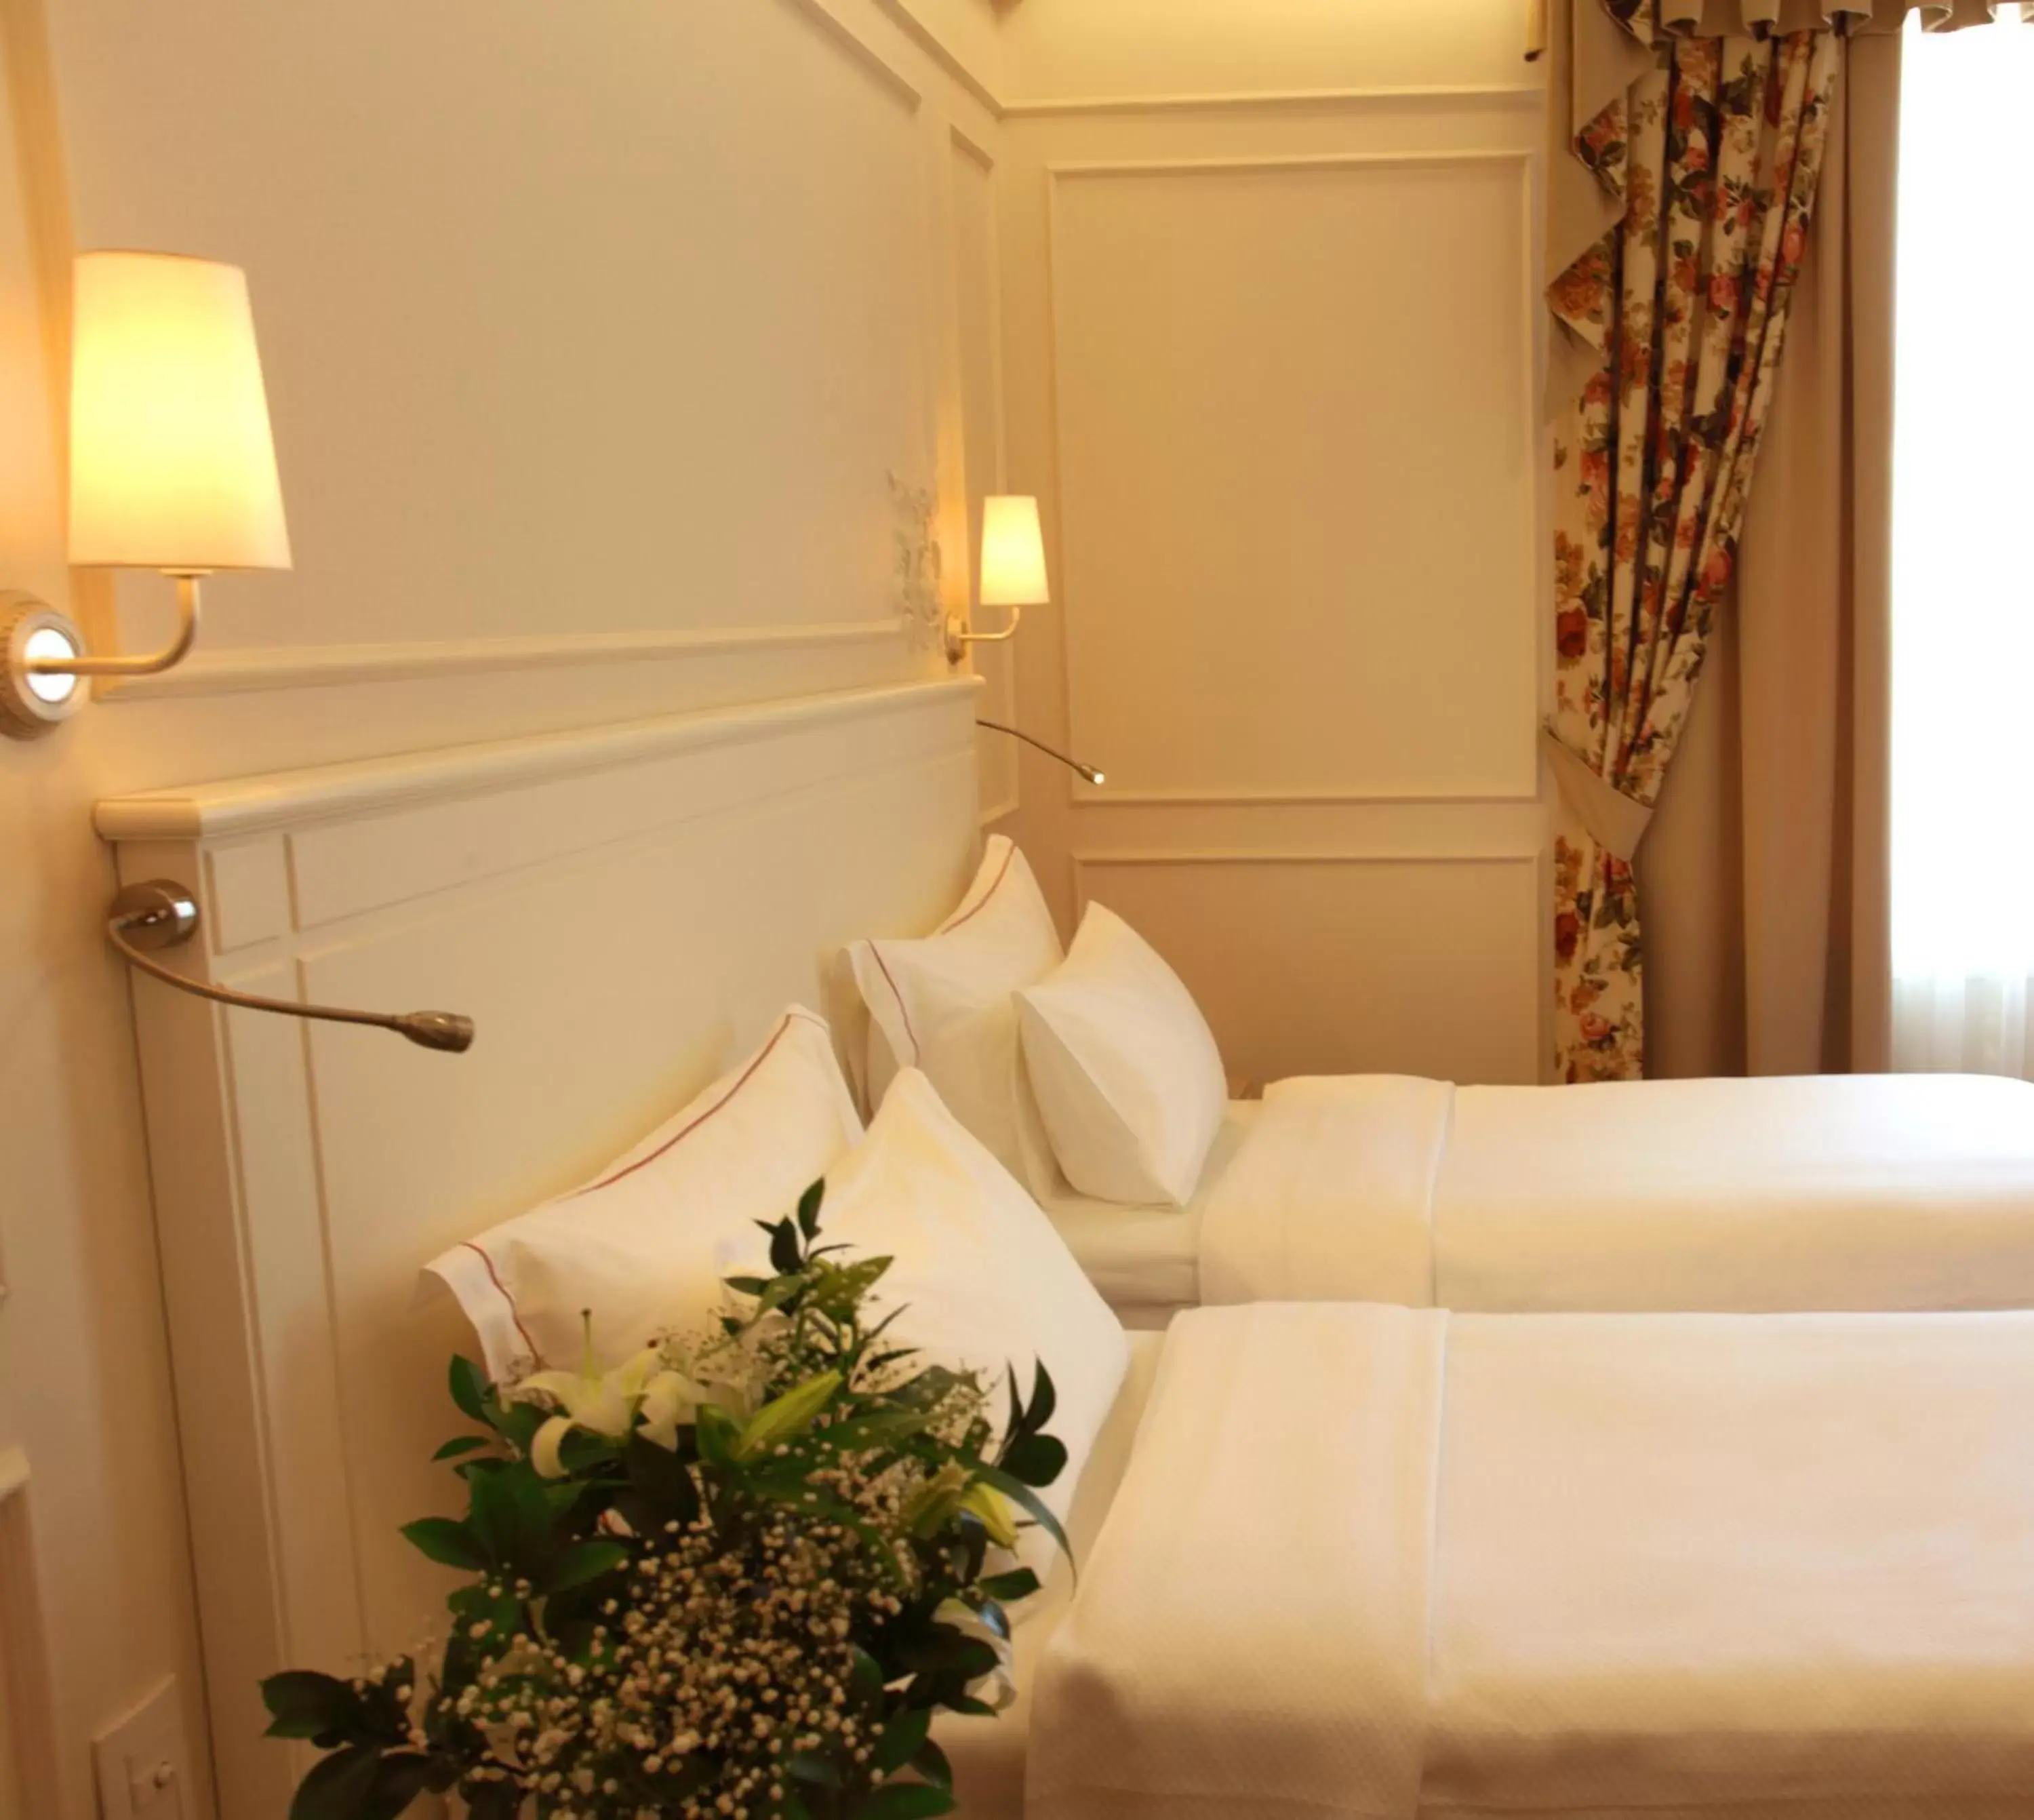 Bed in Corinne Art & Boutique Hotel